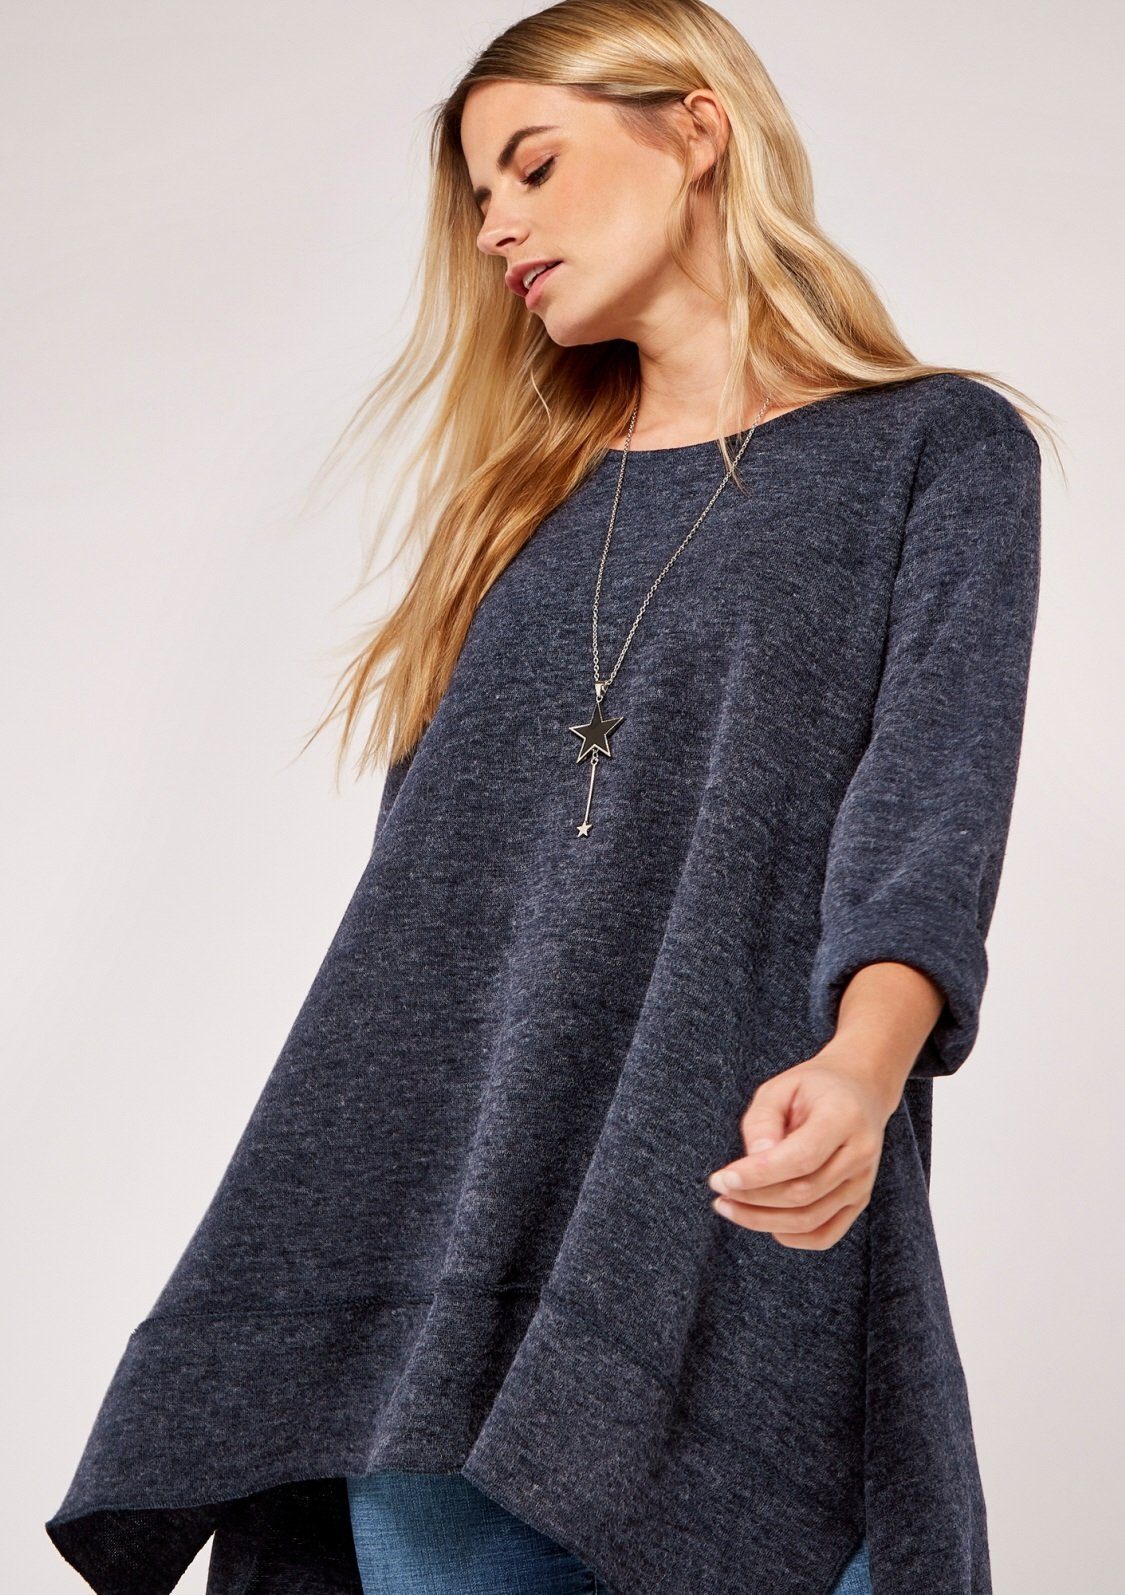 Kette) mit (2-tlg., 3/4 Waterfall Apricot Kette Fuzzy Necklace mit Top Arm-Pullover